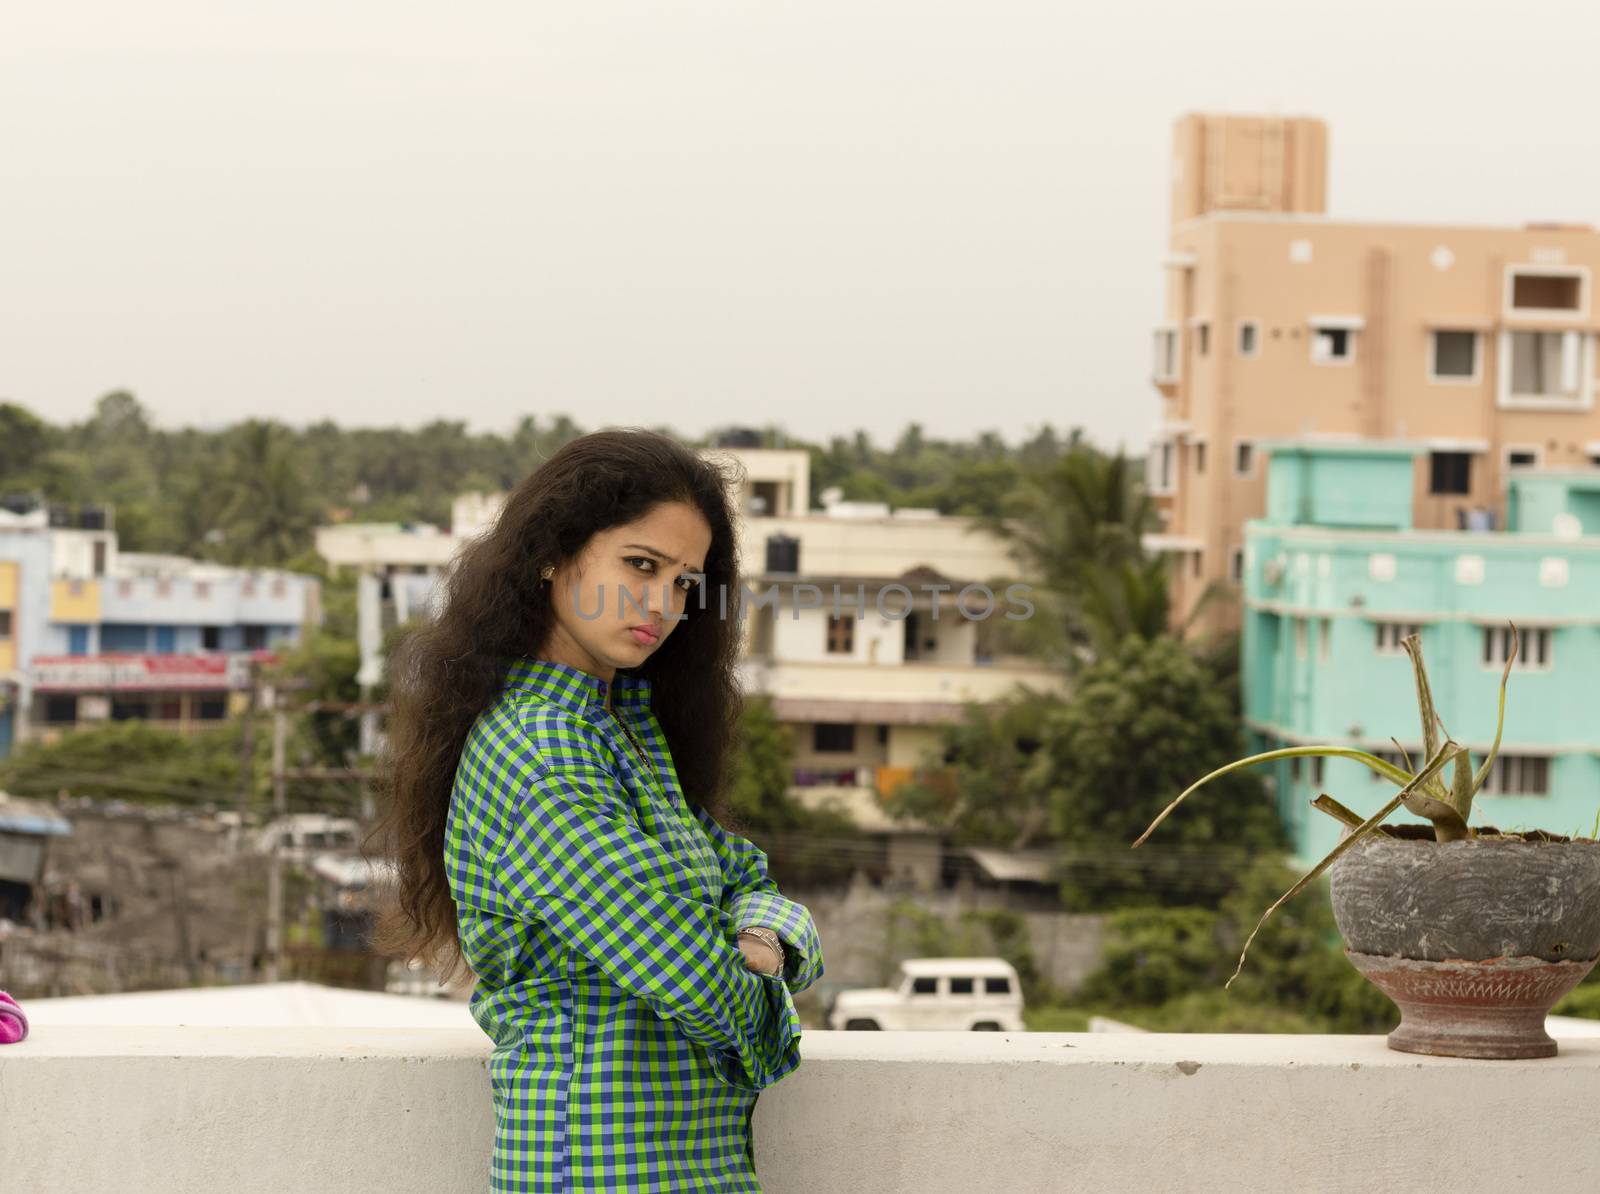 A young Hindu Indian woman standing in an open environment above the roof of the house and happily photographed beautiful and wearing a green shirt